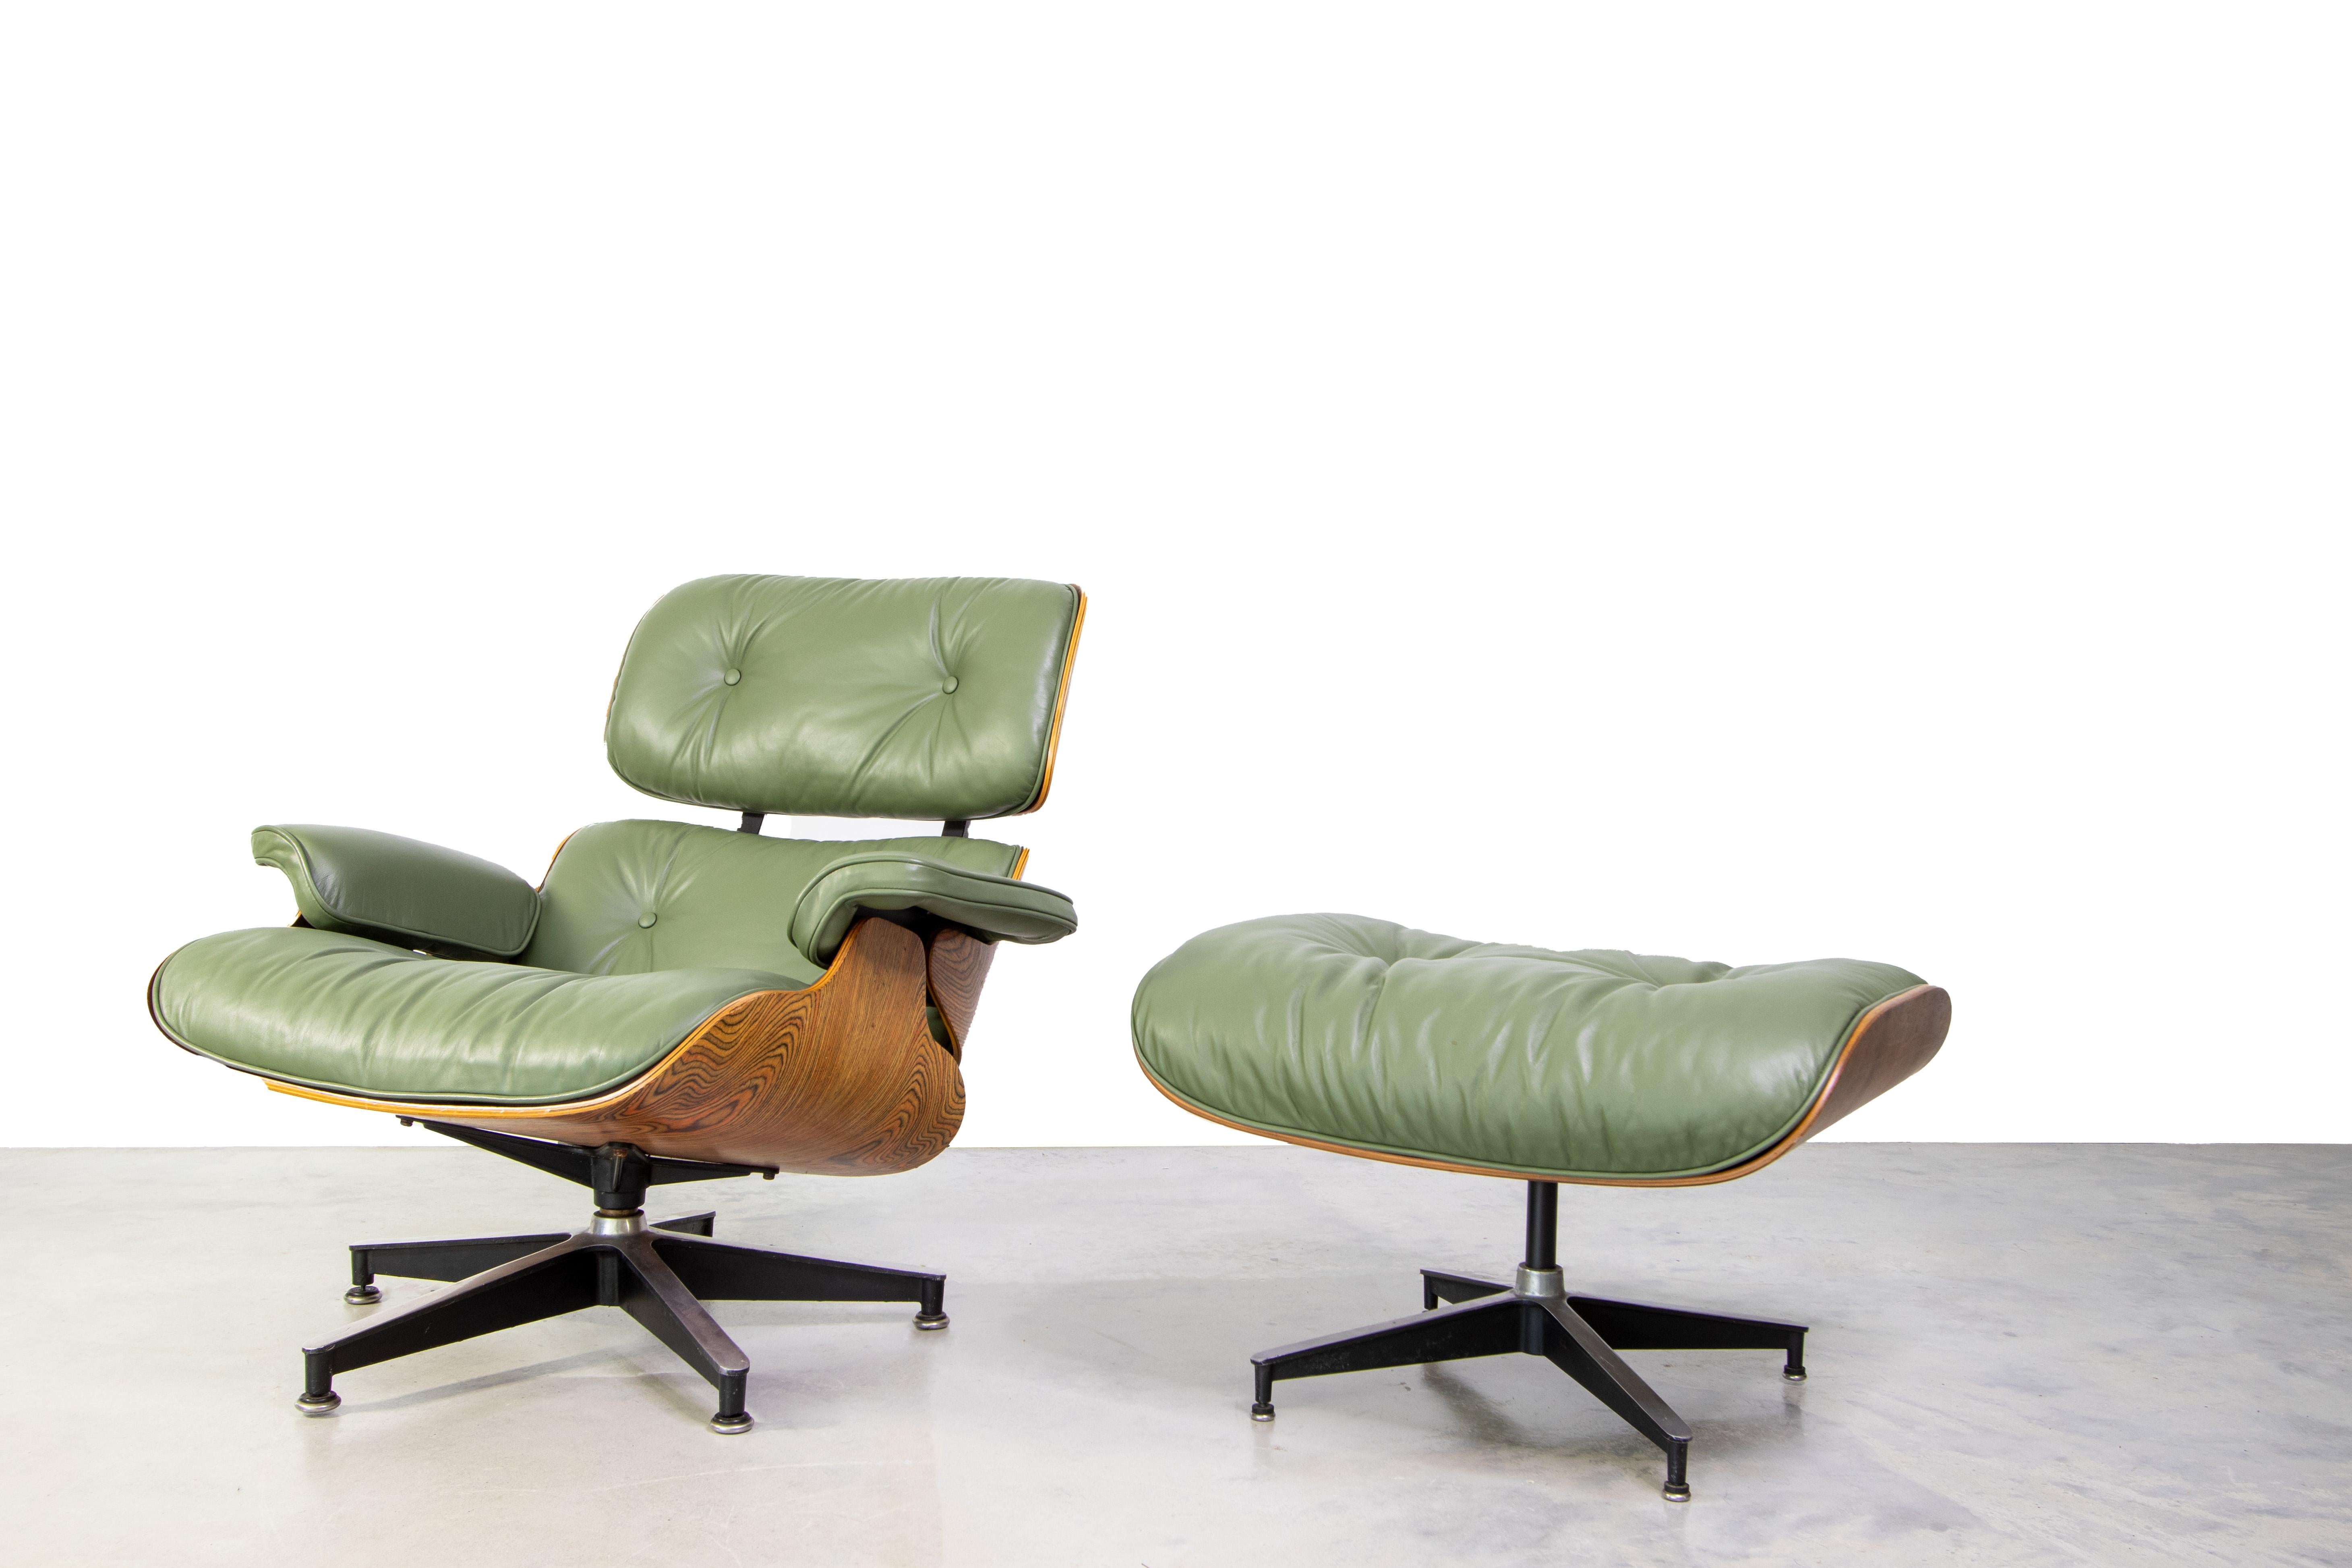 Mid-Century Modern One of a Kind Zebrawood Eames Lounge Chair for Herman Miller w/ Rosewood Ottoman